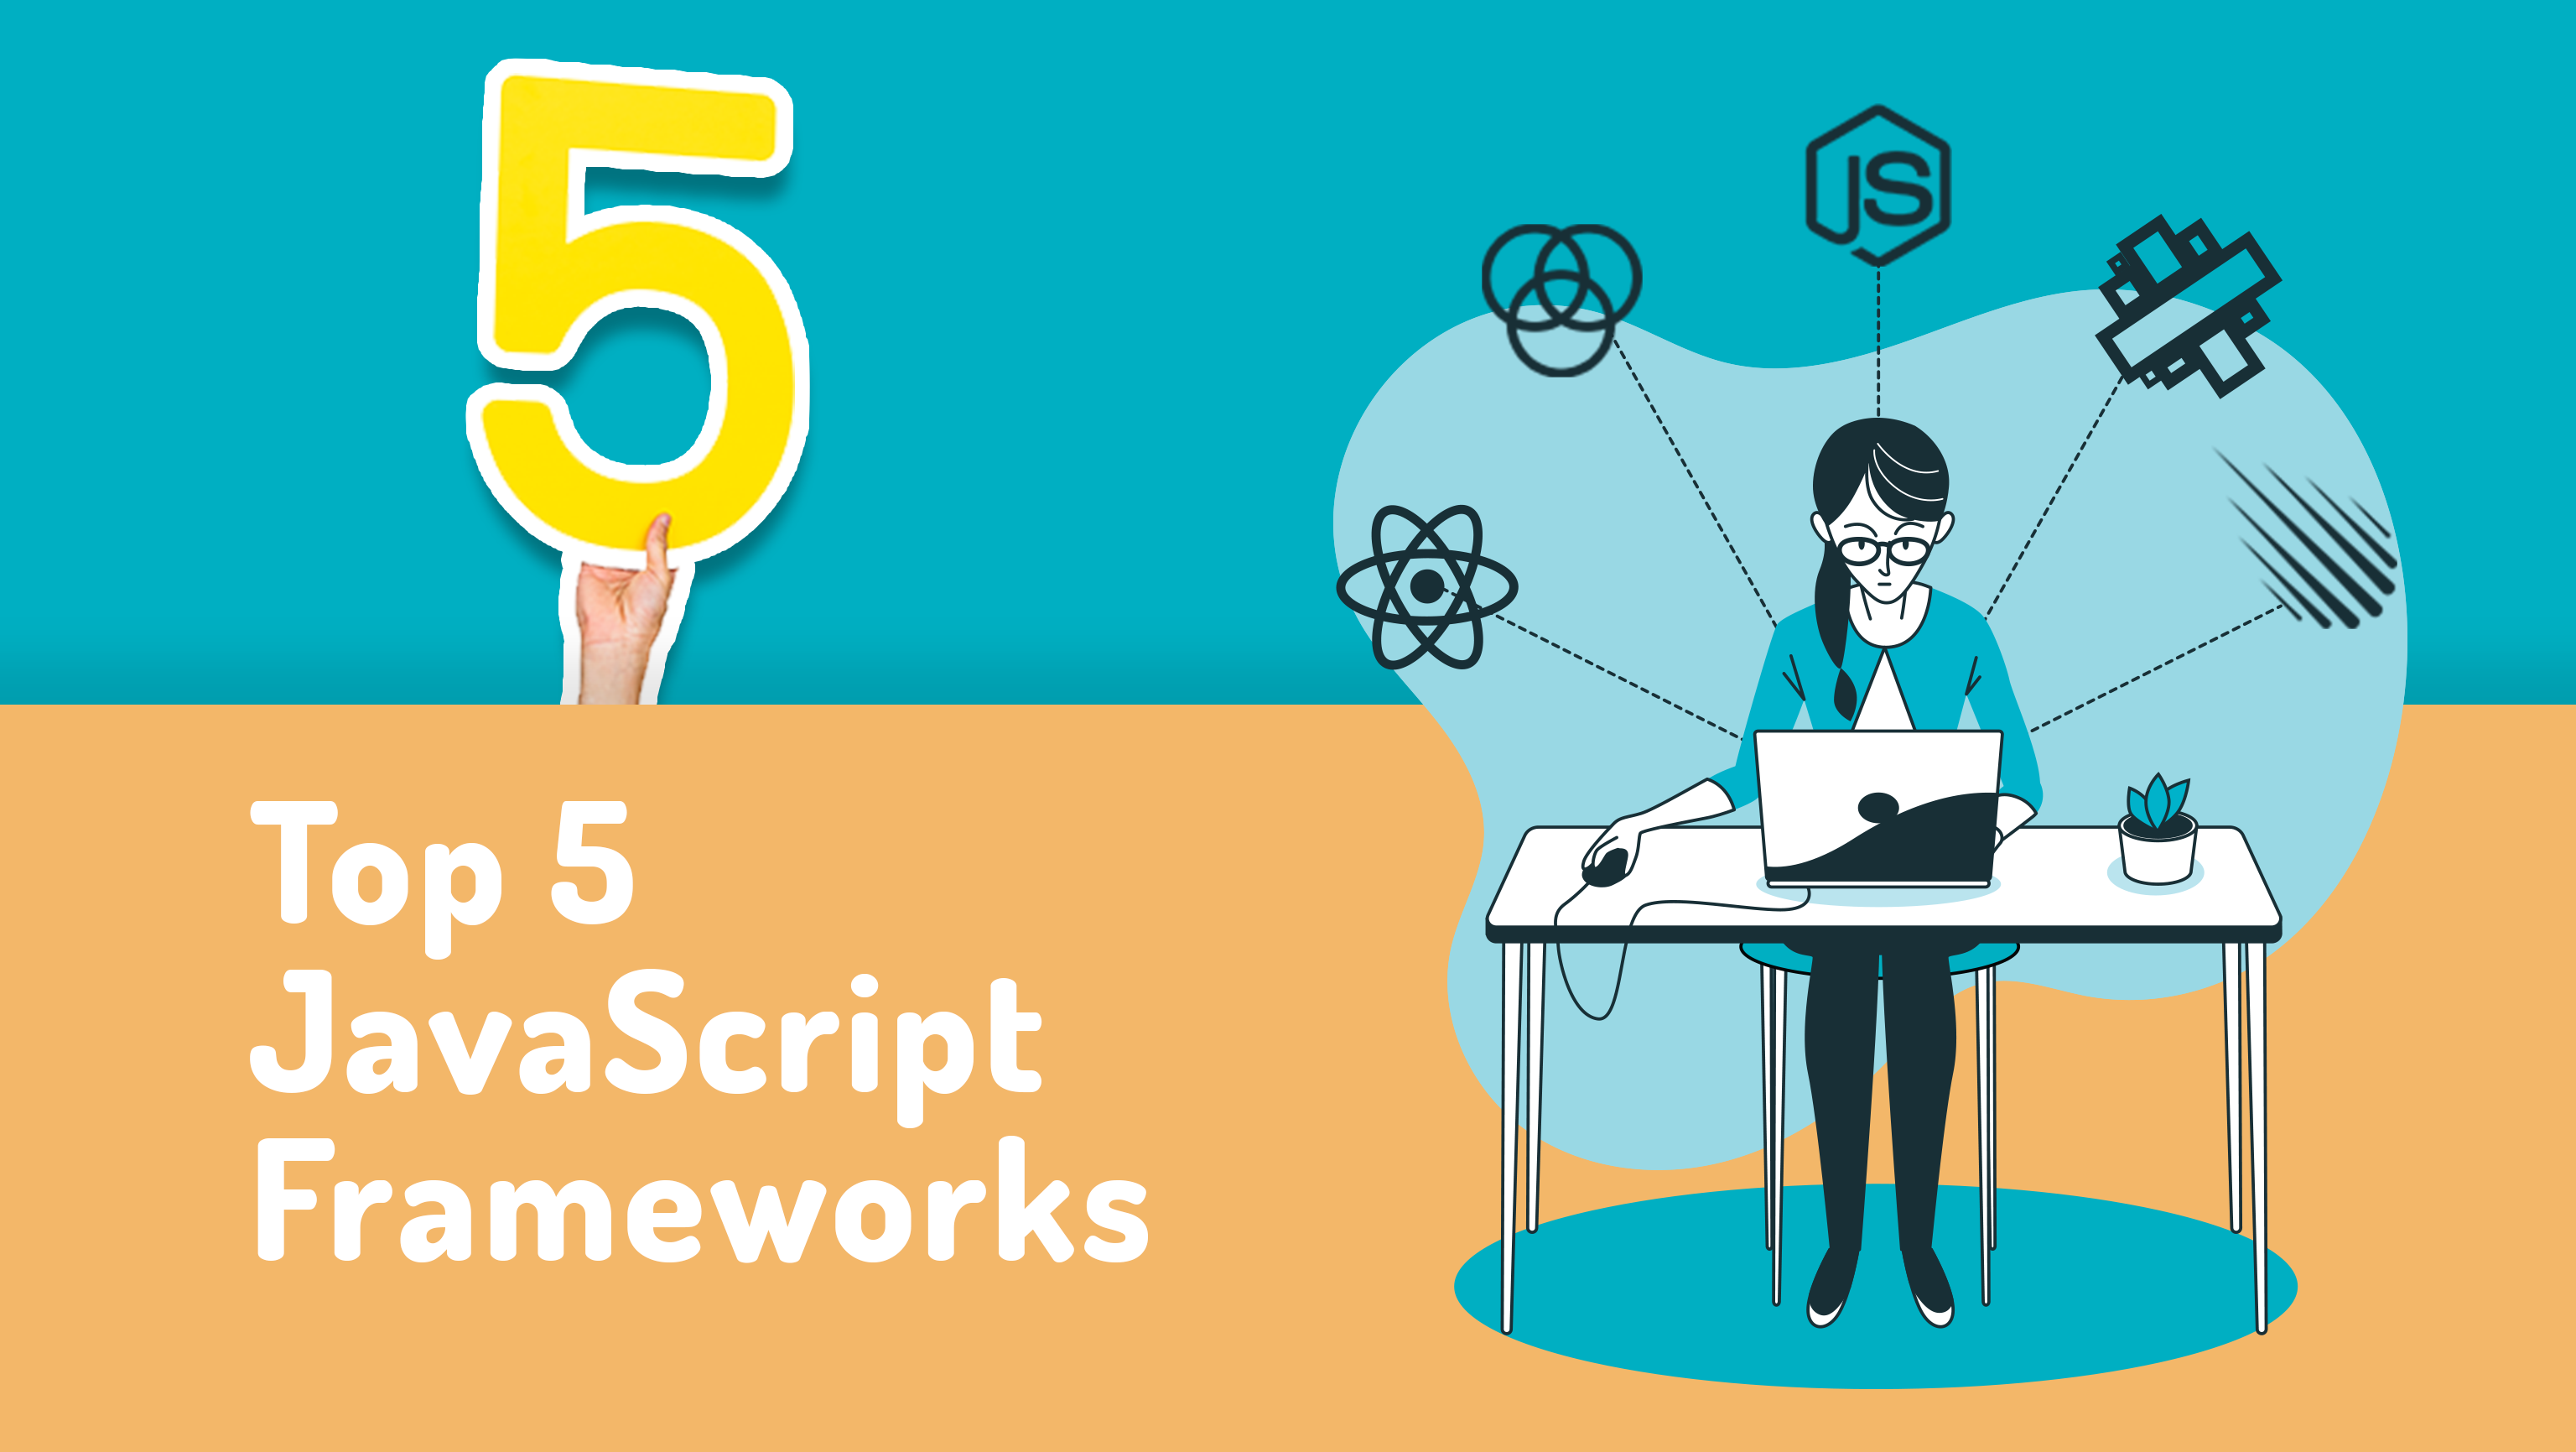 Top 5 JavaScript Frameworks to Use in 2021